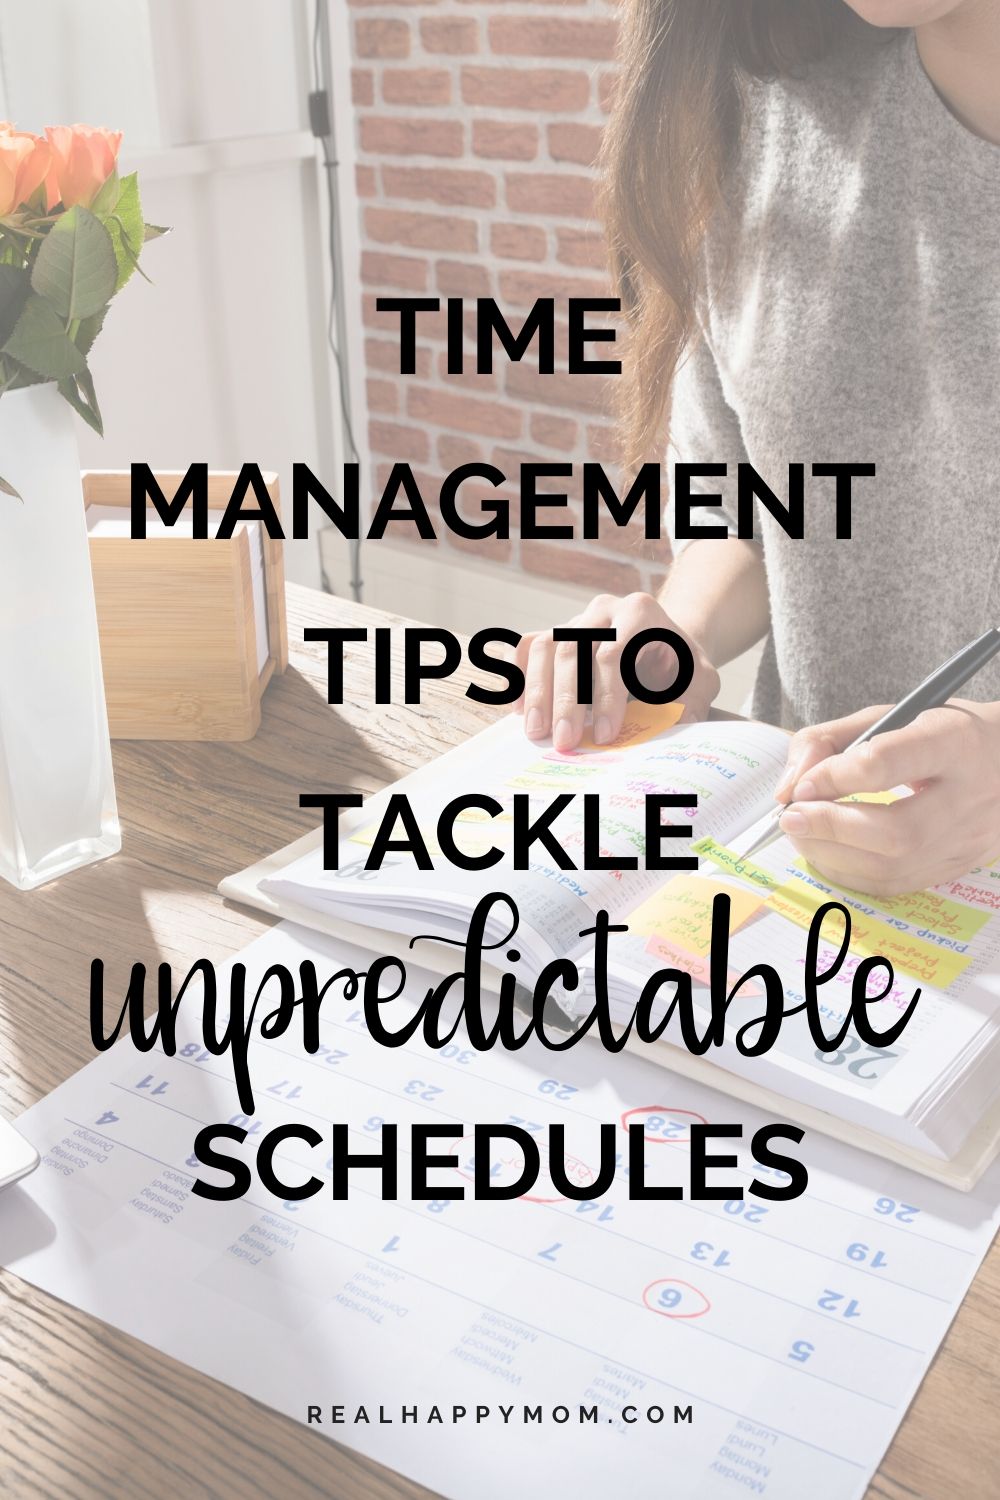 Time Management Tips to Tackle Unpredictable Schedules